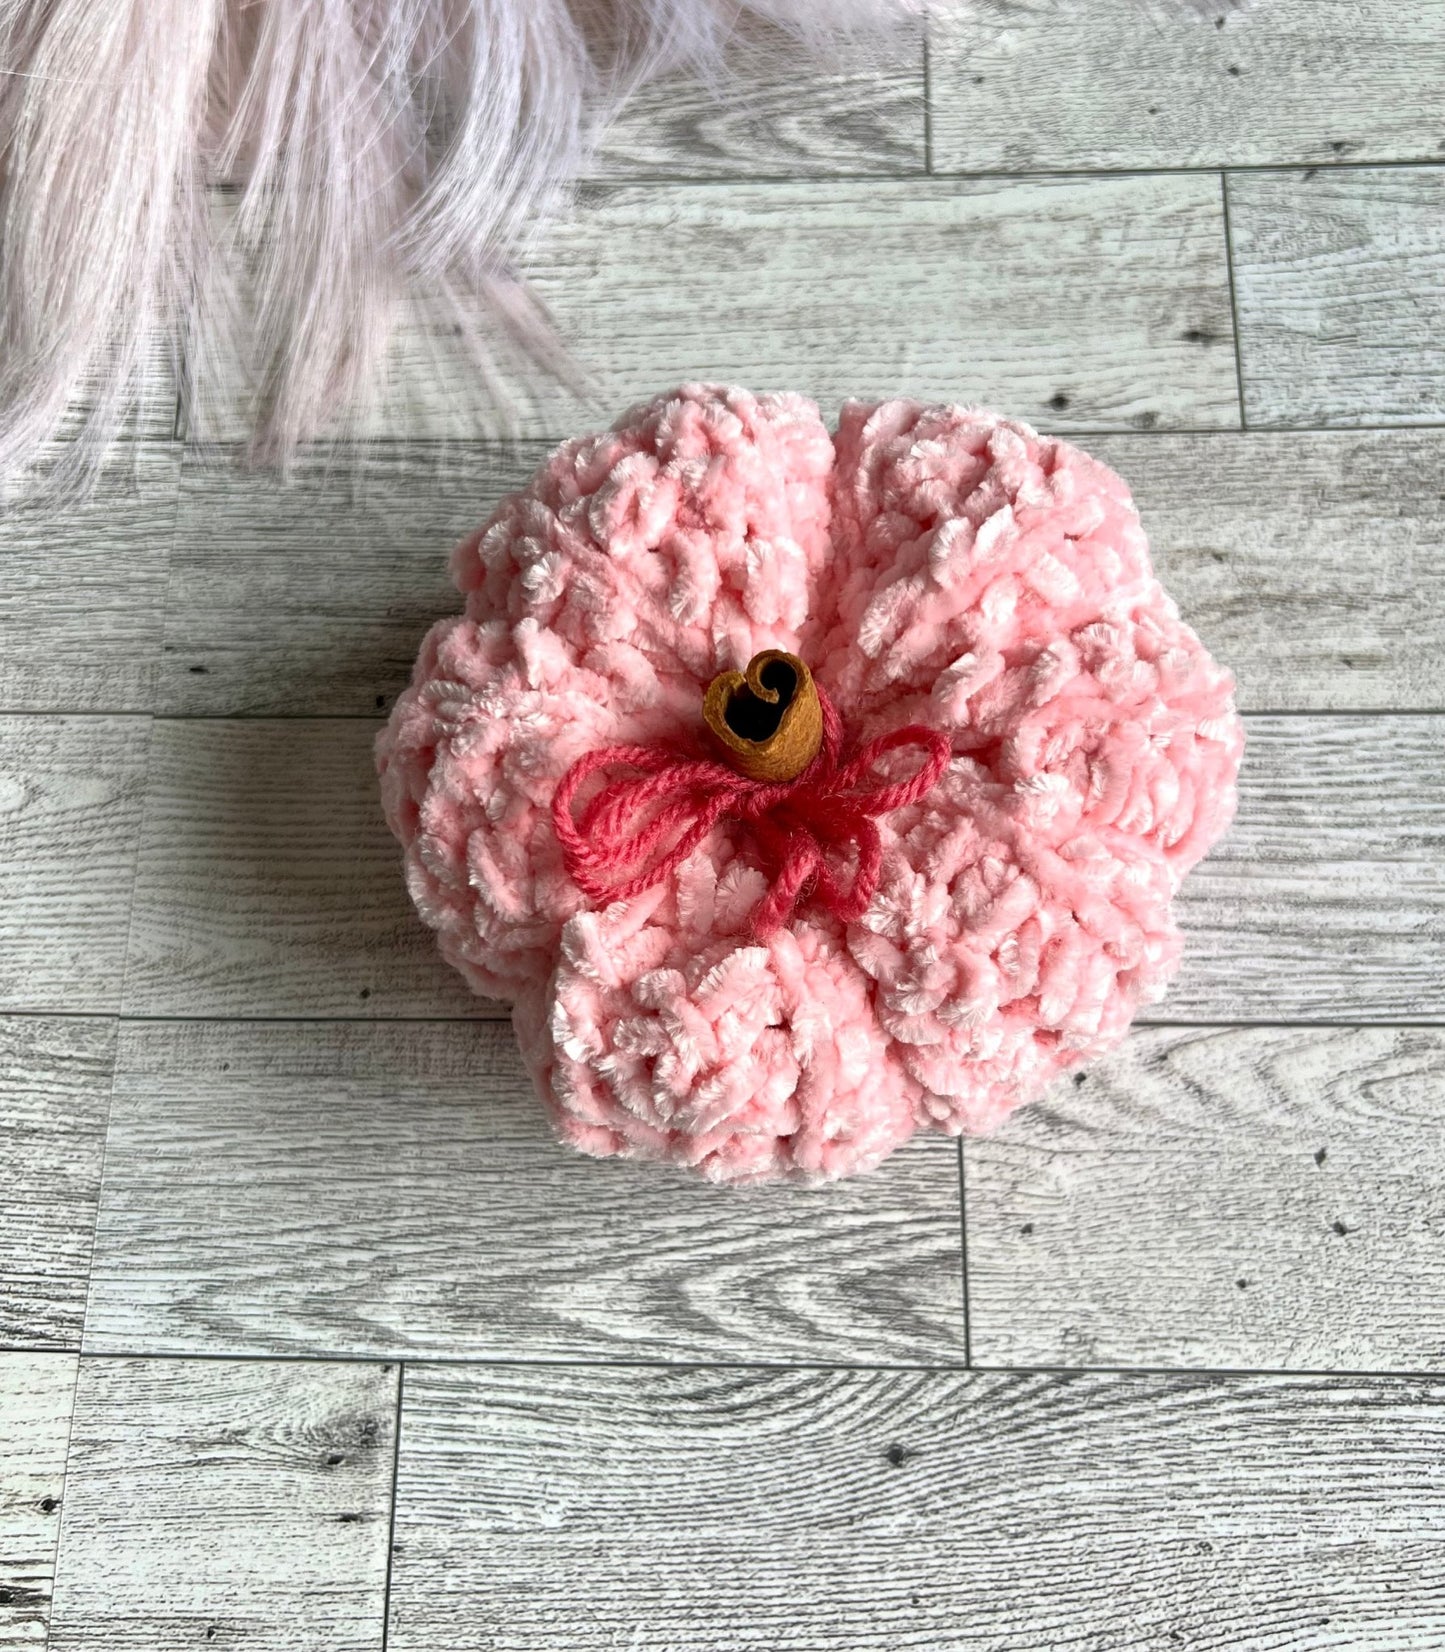 Plush Pink pumpkin decorative with cinnamon stick stem for touch of warmth - Lilly Grace Sparkle Boutique